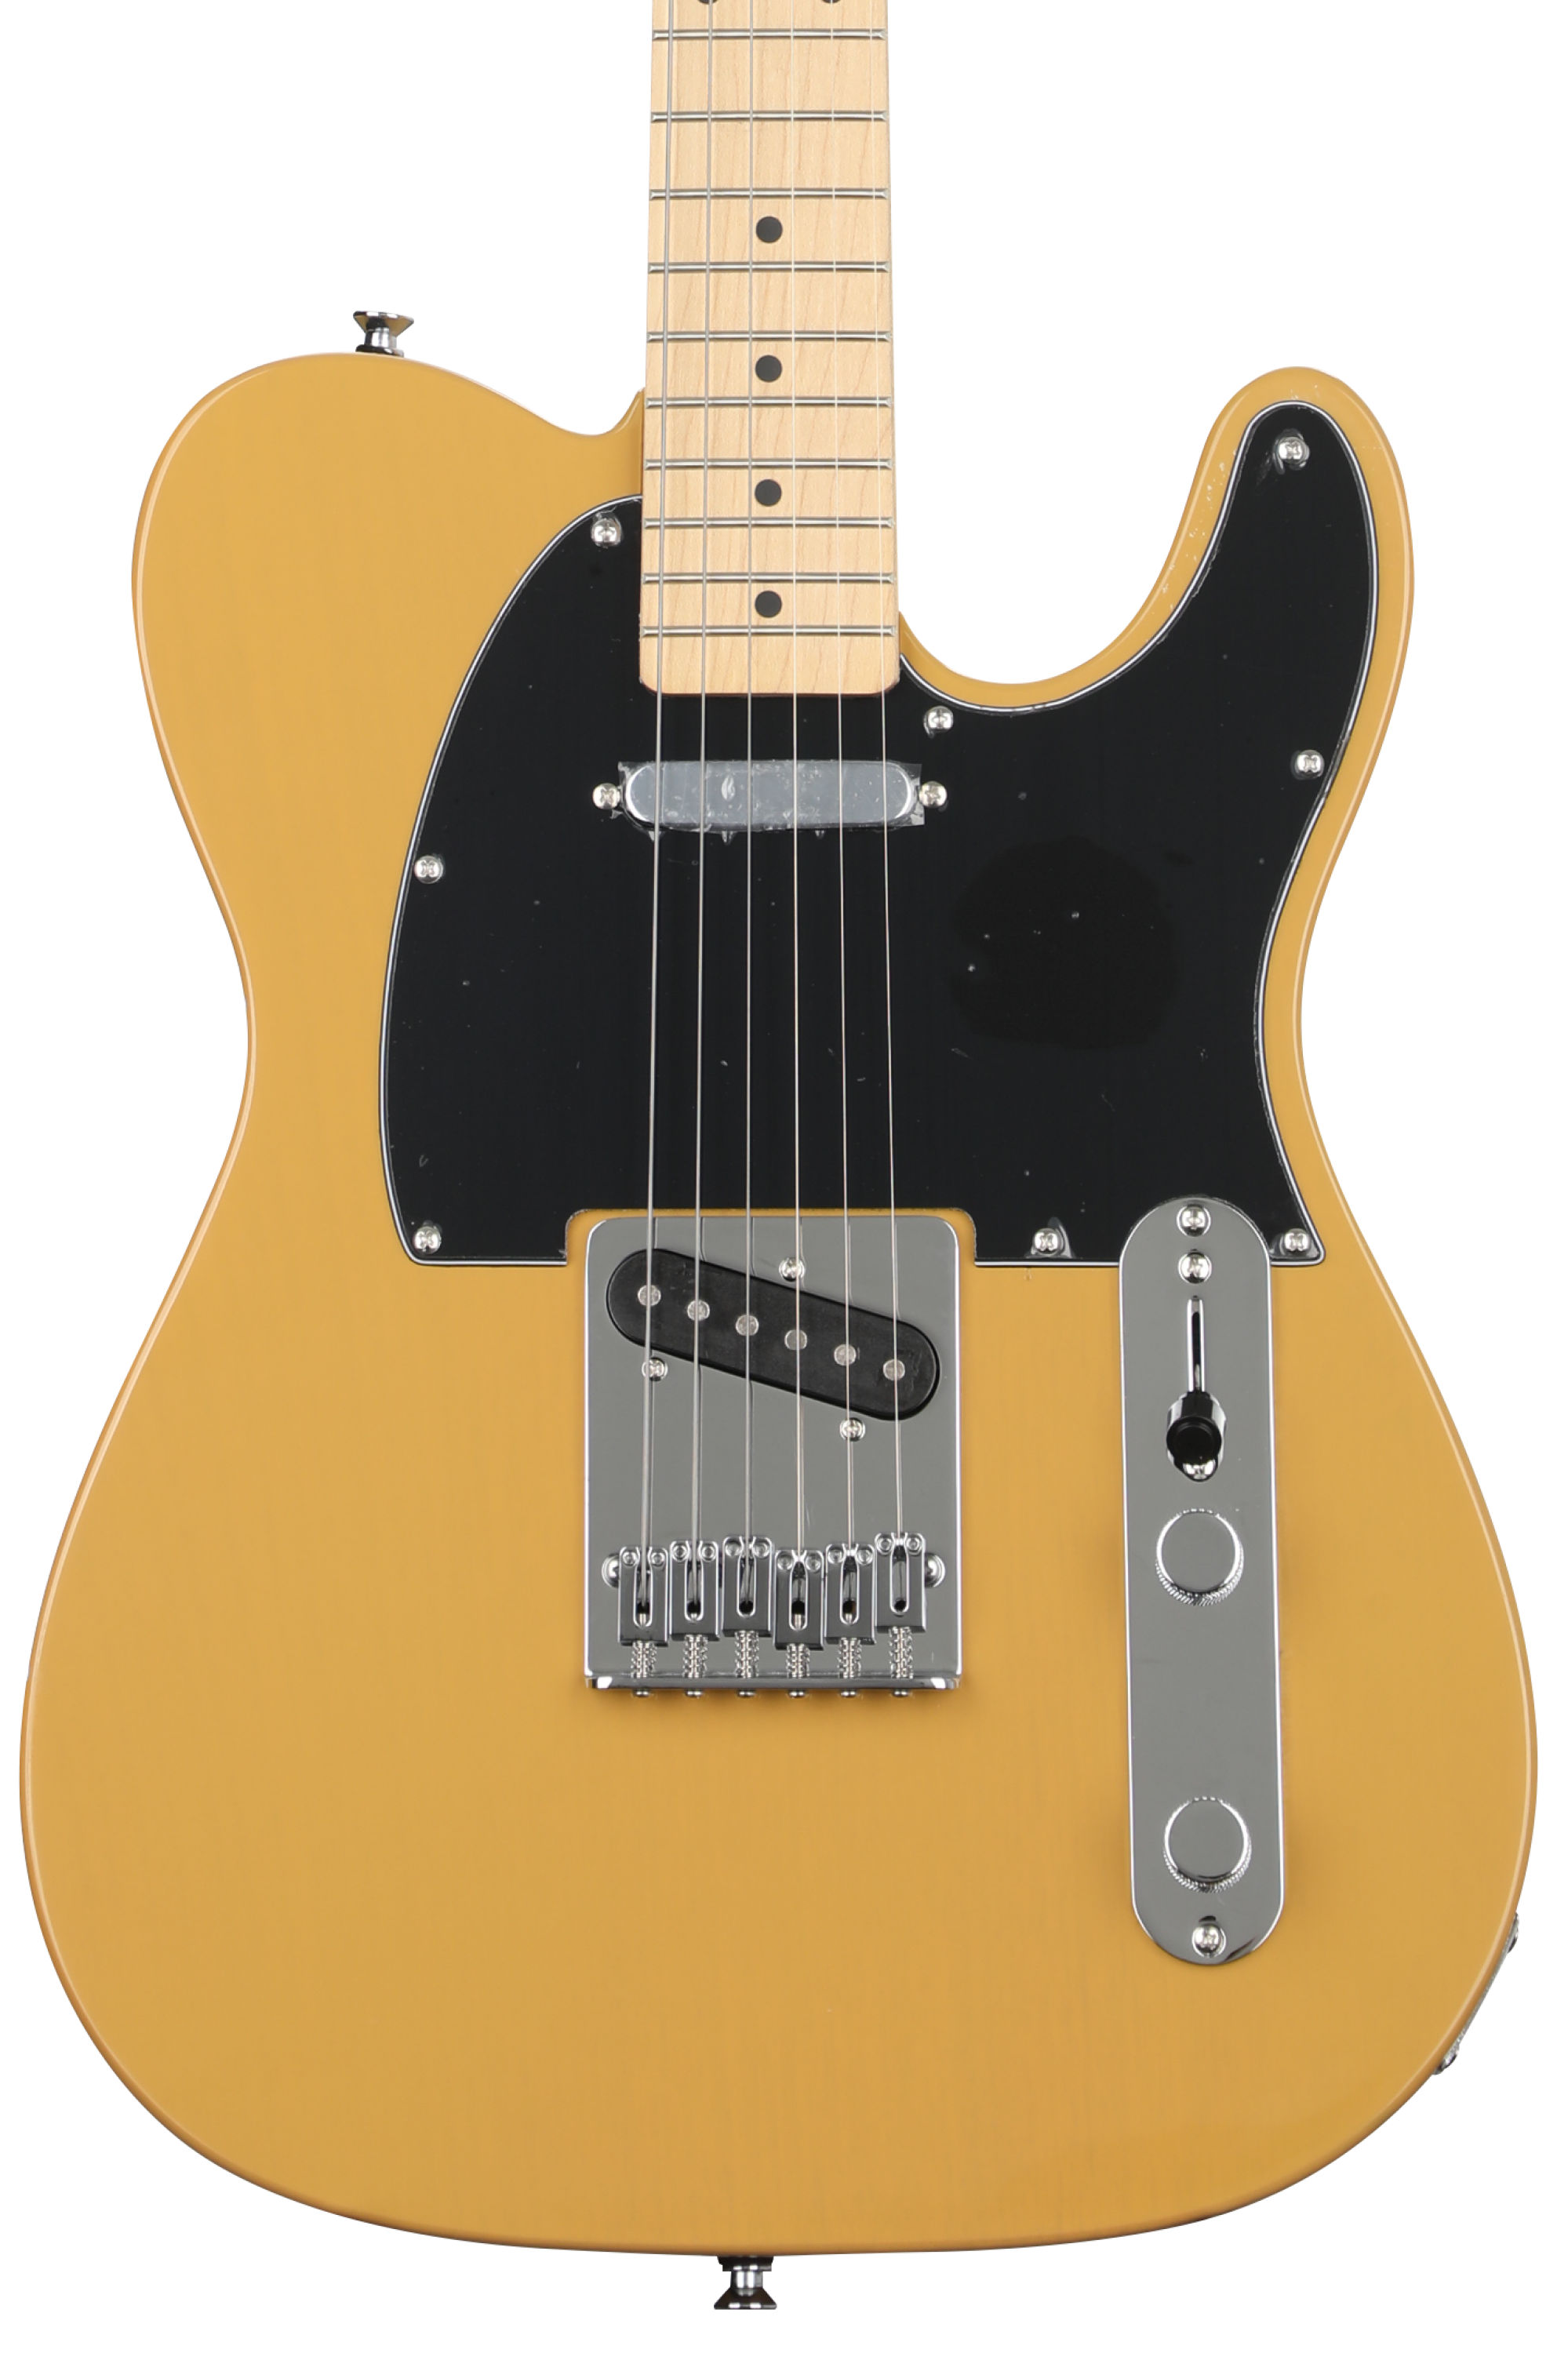 Bundled Item: Squier Affinity Series Telecaster Electric Guitar - Butterscotch Blonde with Maple Fingerboard